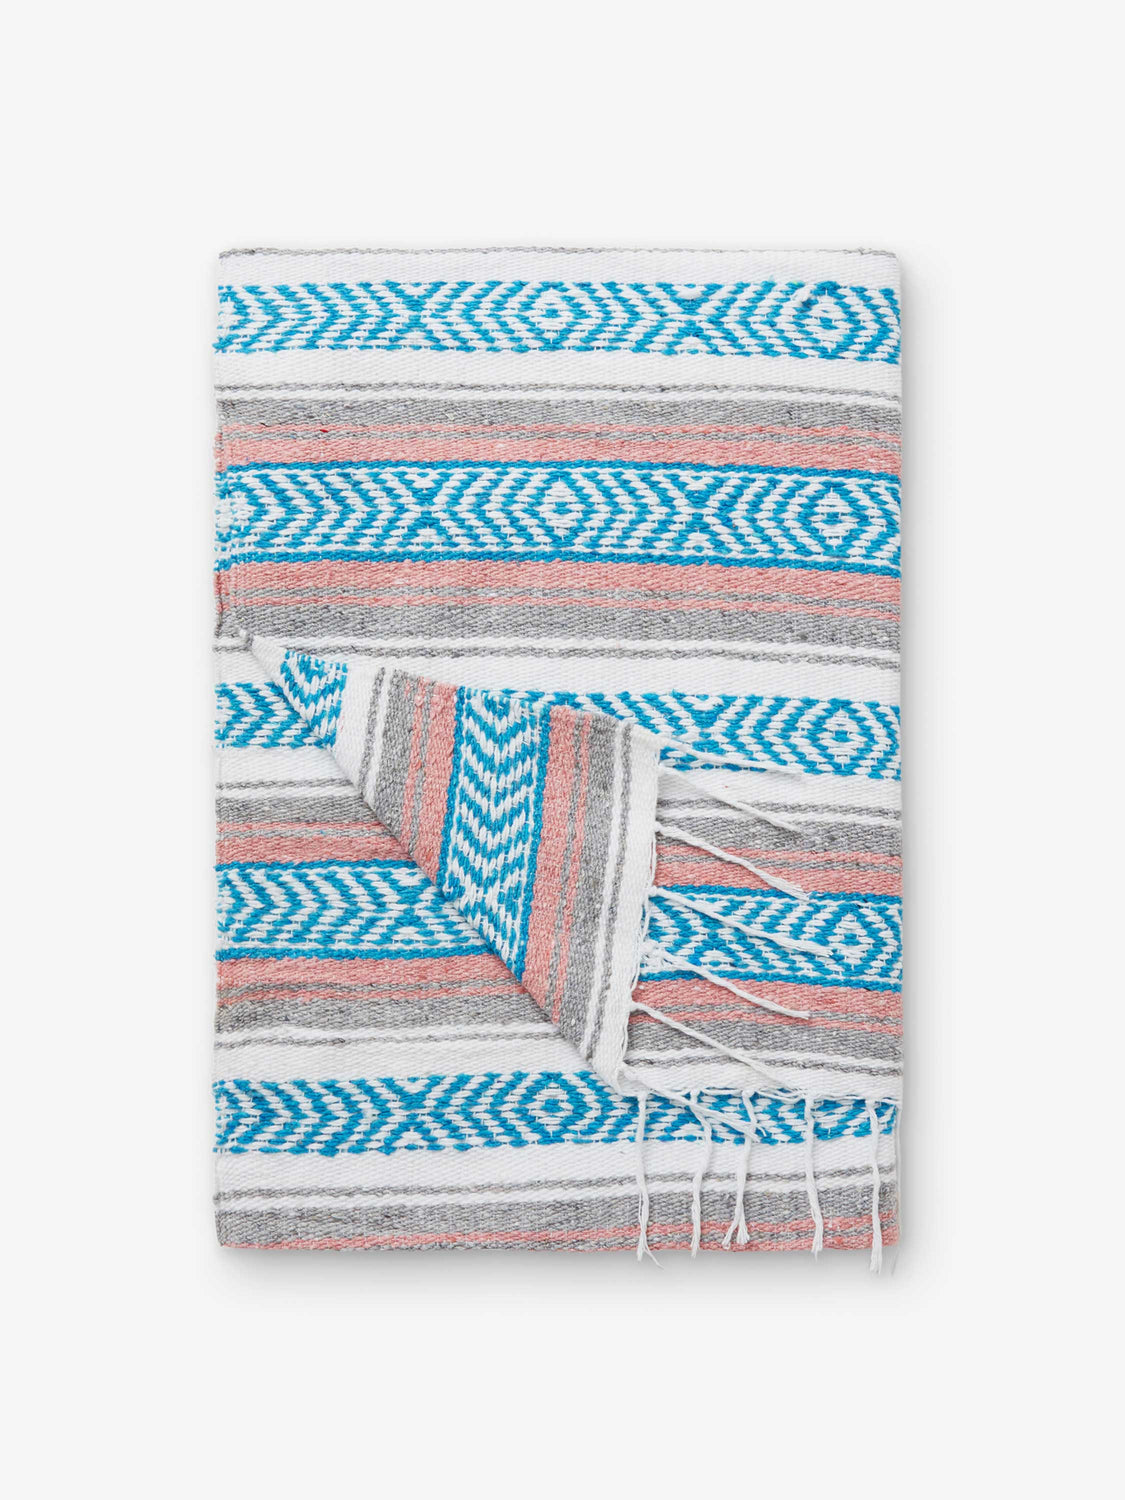 A folded traditional, hand-woven Mexican blanket in blue, pink, and gray.  